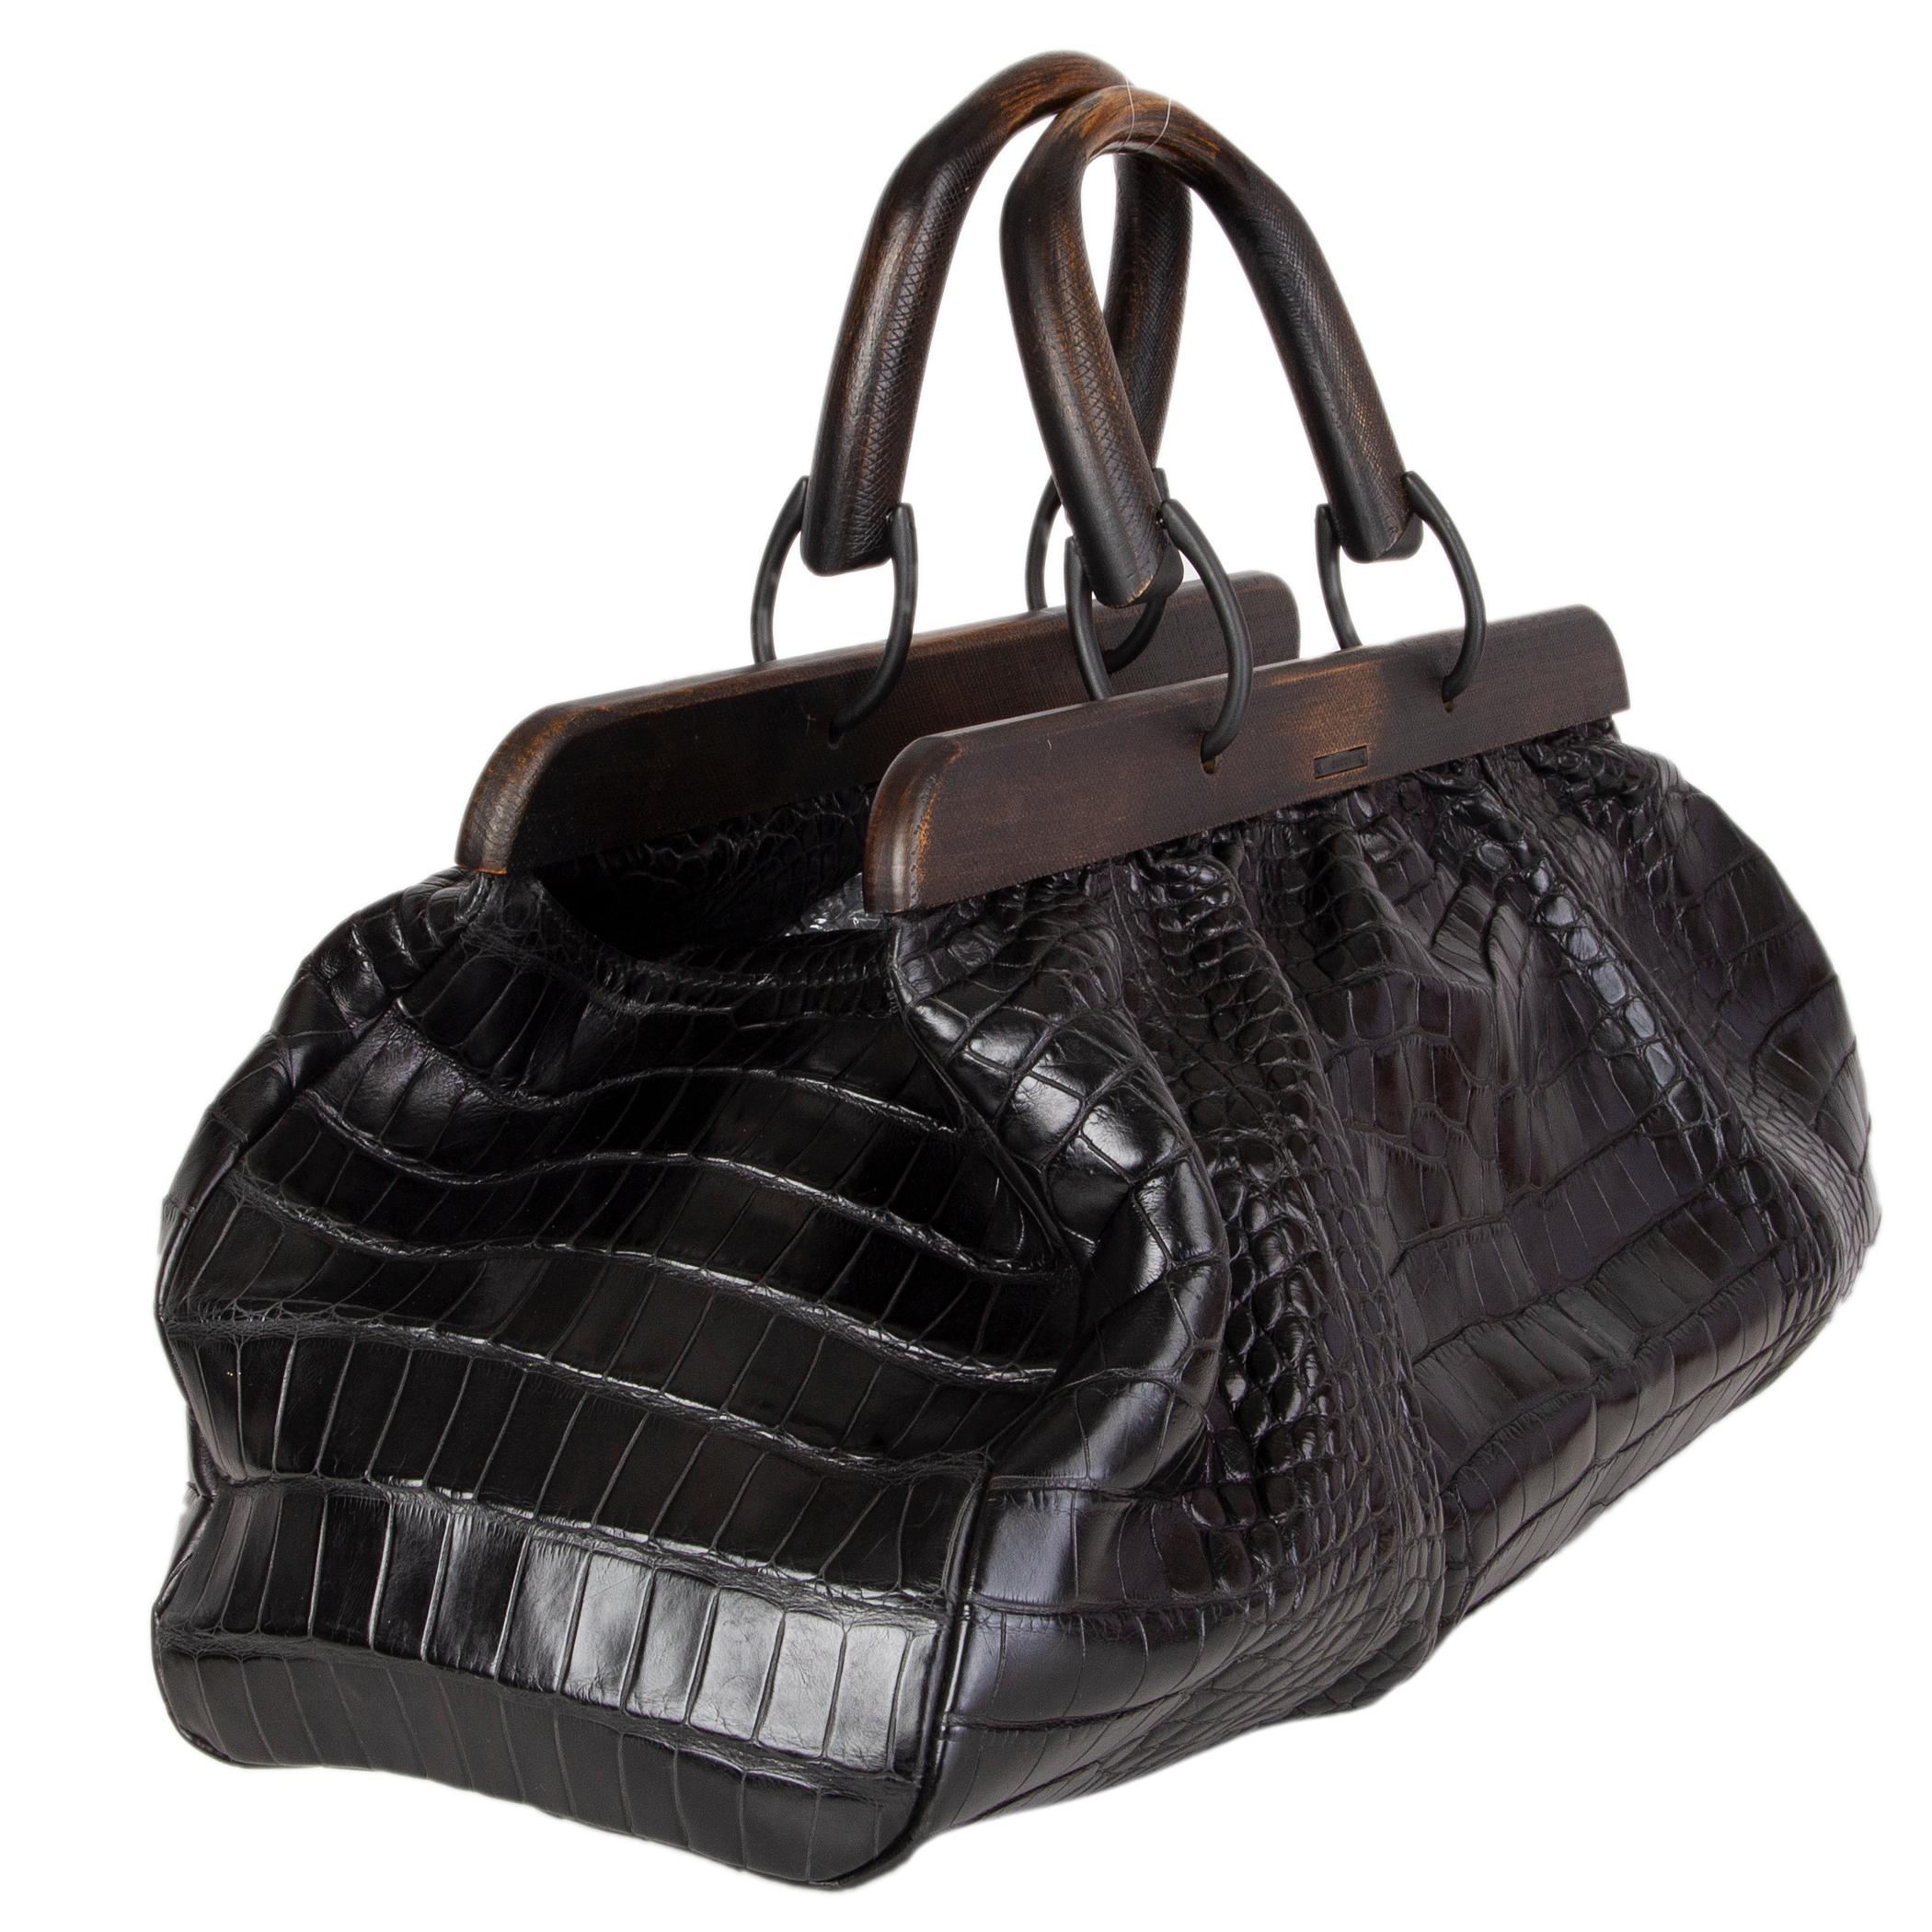 Gucci by Tom Ford docotors bag in black soft crocodile with distressed wooden handles. Vintage 2002. Closes with a belt on top. Lined in black leather with a zipper pocket against the back. Has been carried and is in excellent condition.

Height